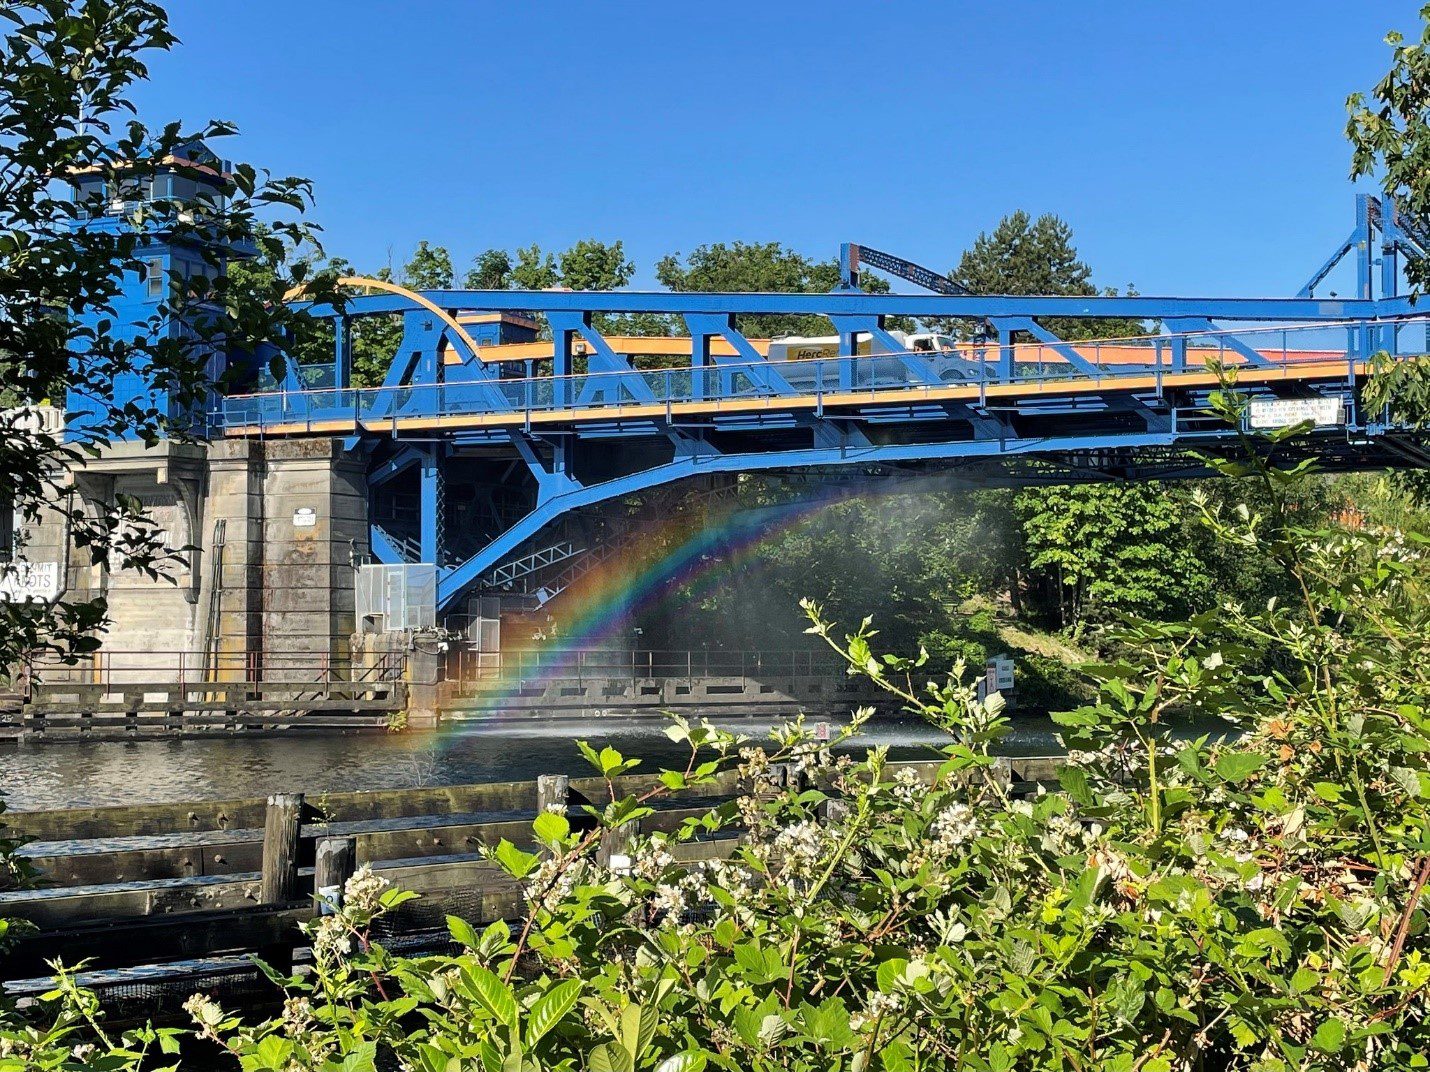 The Fremont Bridge receives a water spray down during last summer’s heat wave, causing a rainbow to appear between the bridge and the water.